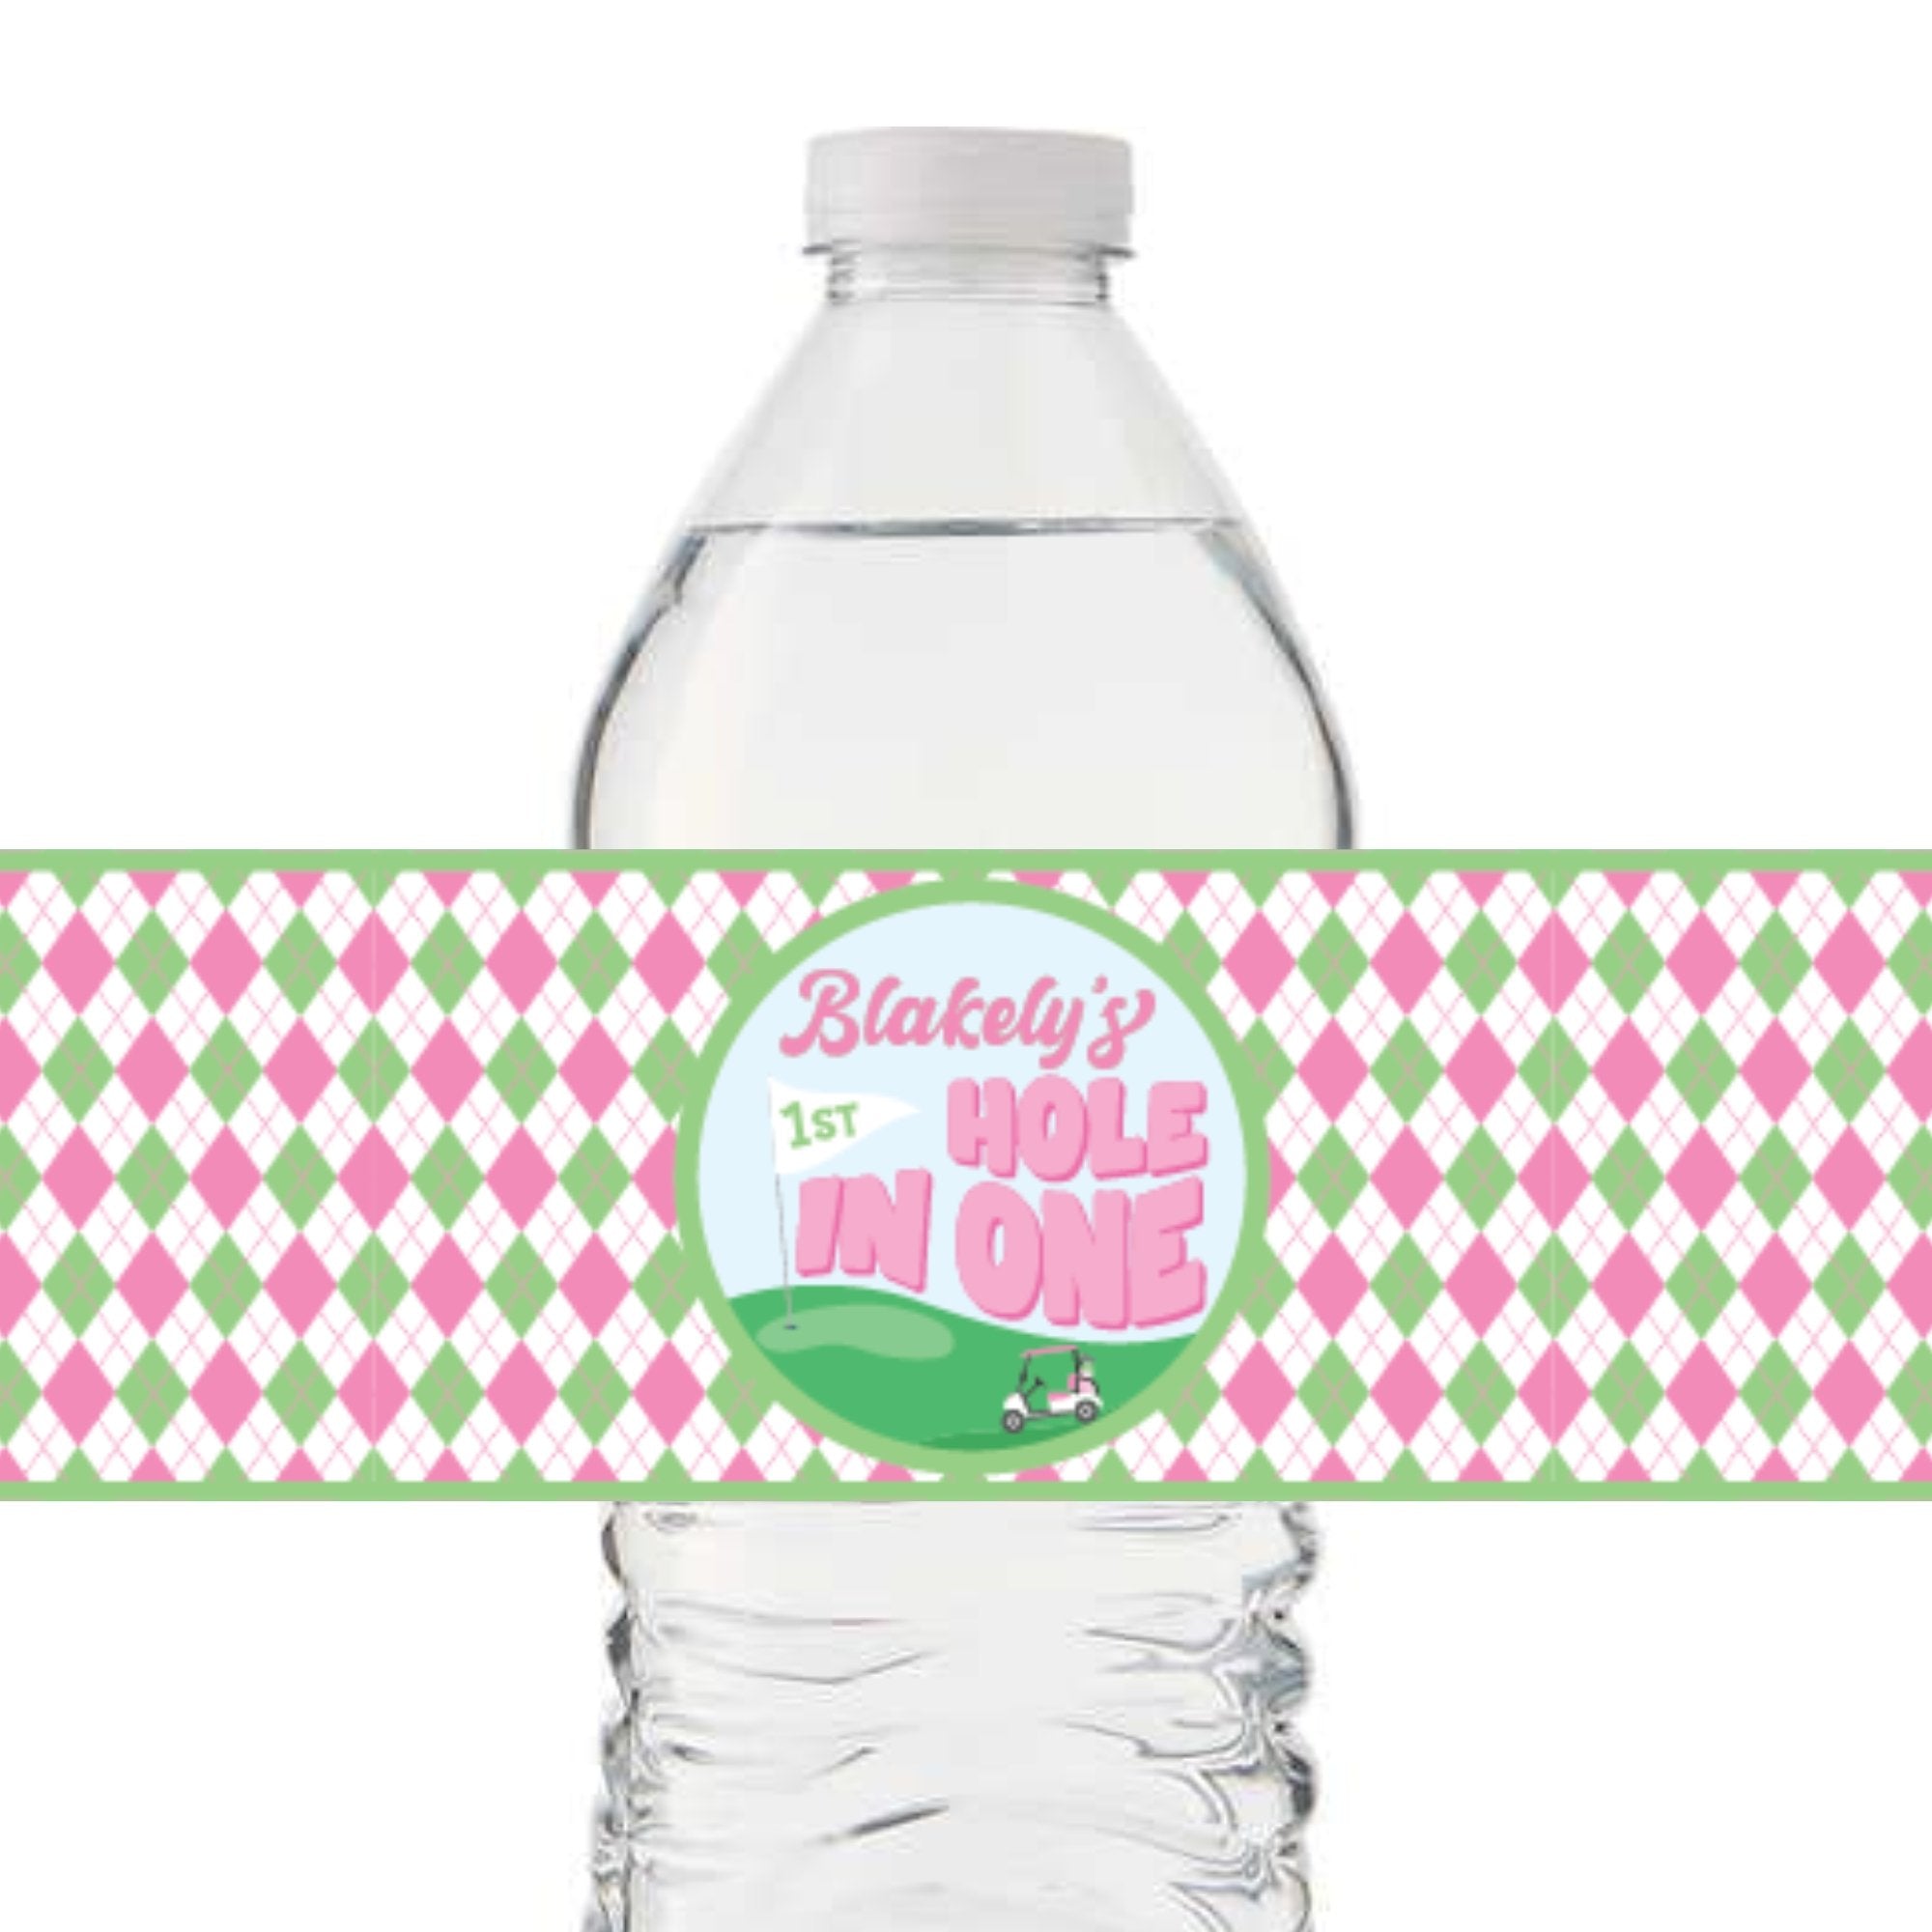 Custom Hole In One Water Bottle Label (Set of 10) - Pink - Sprinkled With Pink #bachelorette #custom #gifts